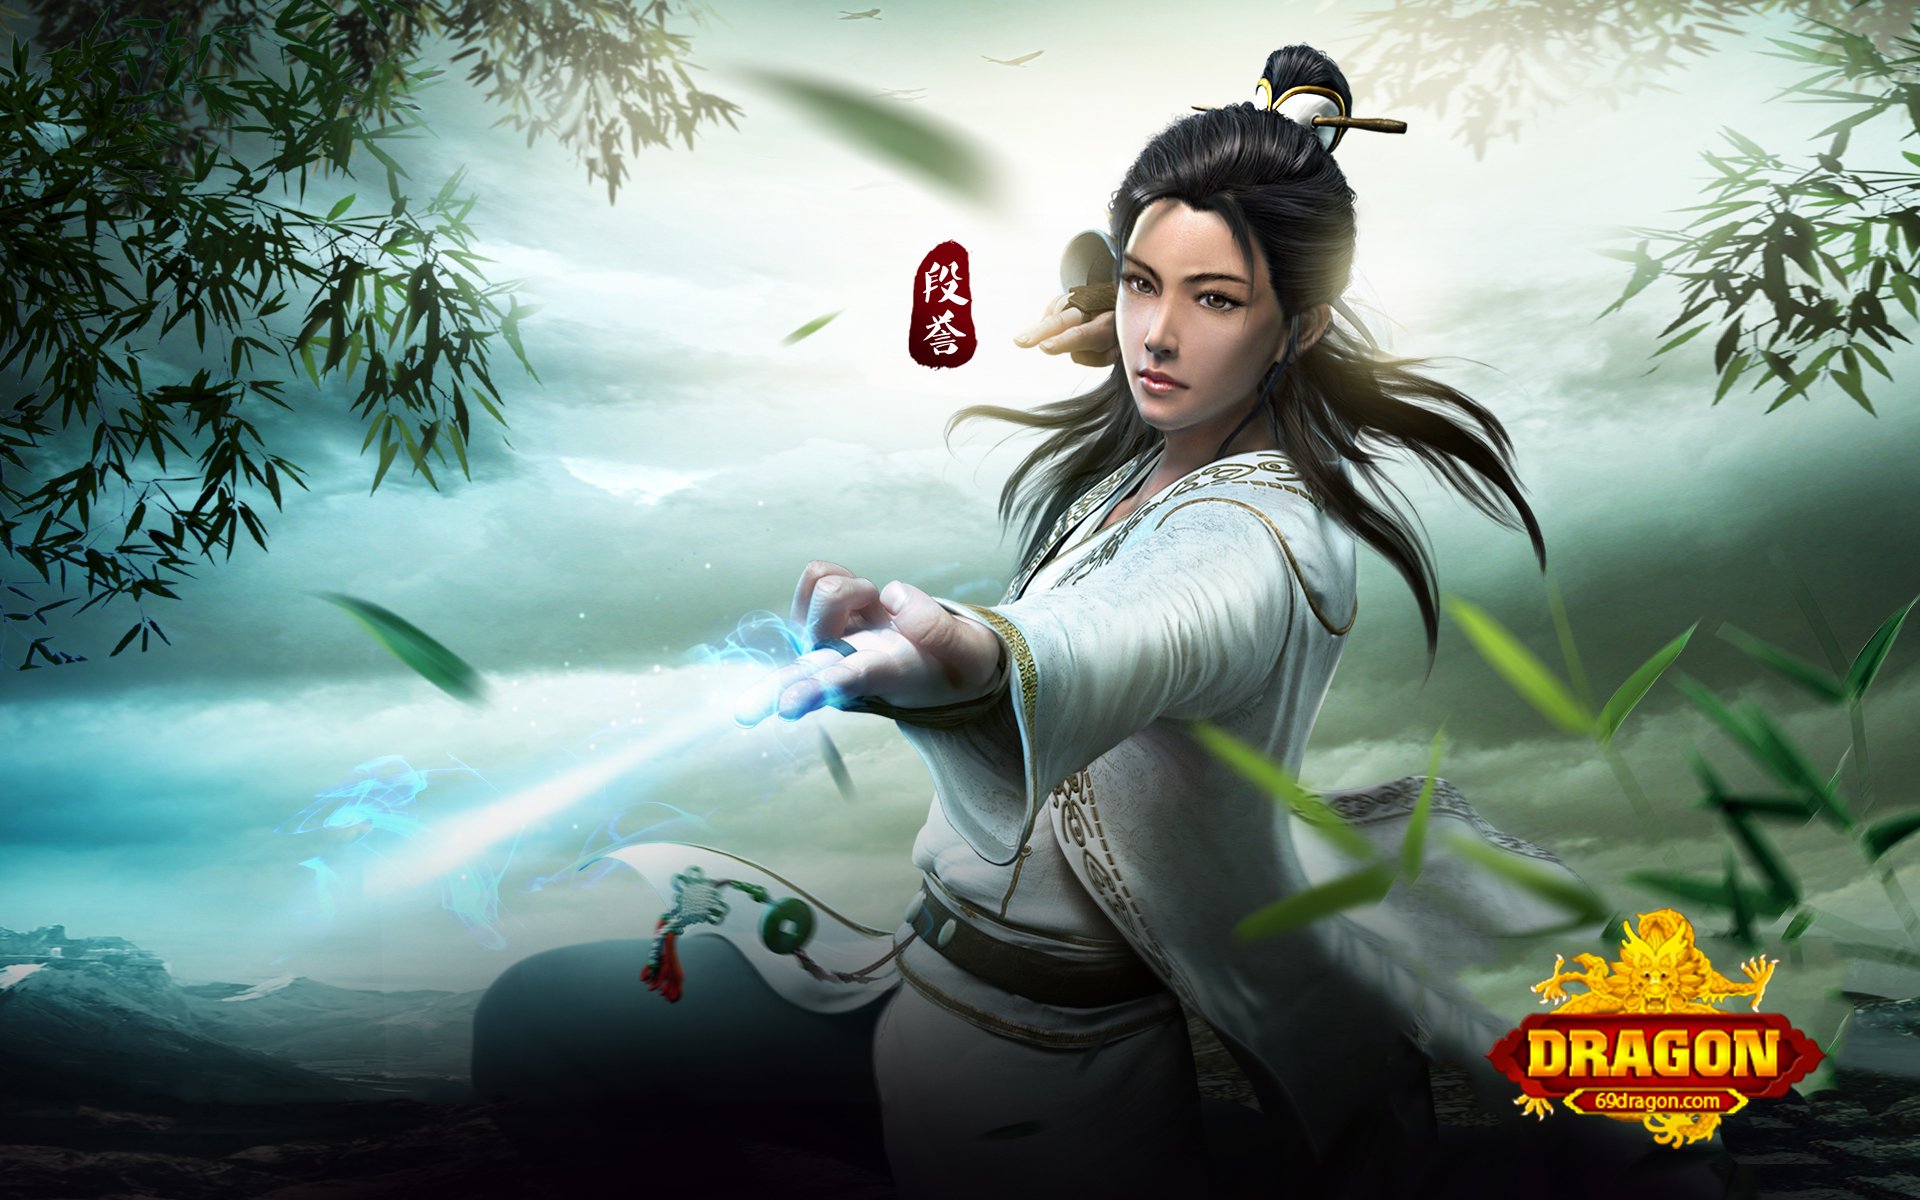 dragon, Oath, Martial, Kung, Action, Fighting, 1tlbb, Fantasy, Mmo, Rpg, Poster, Warrior Wallpaper